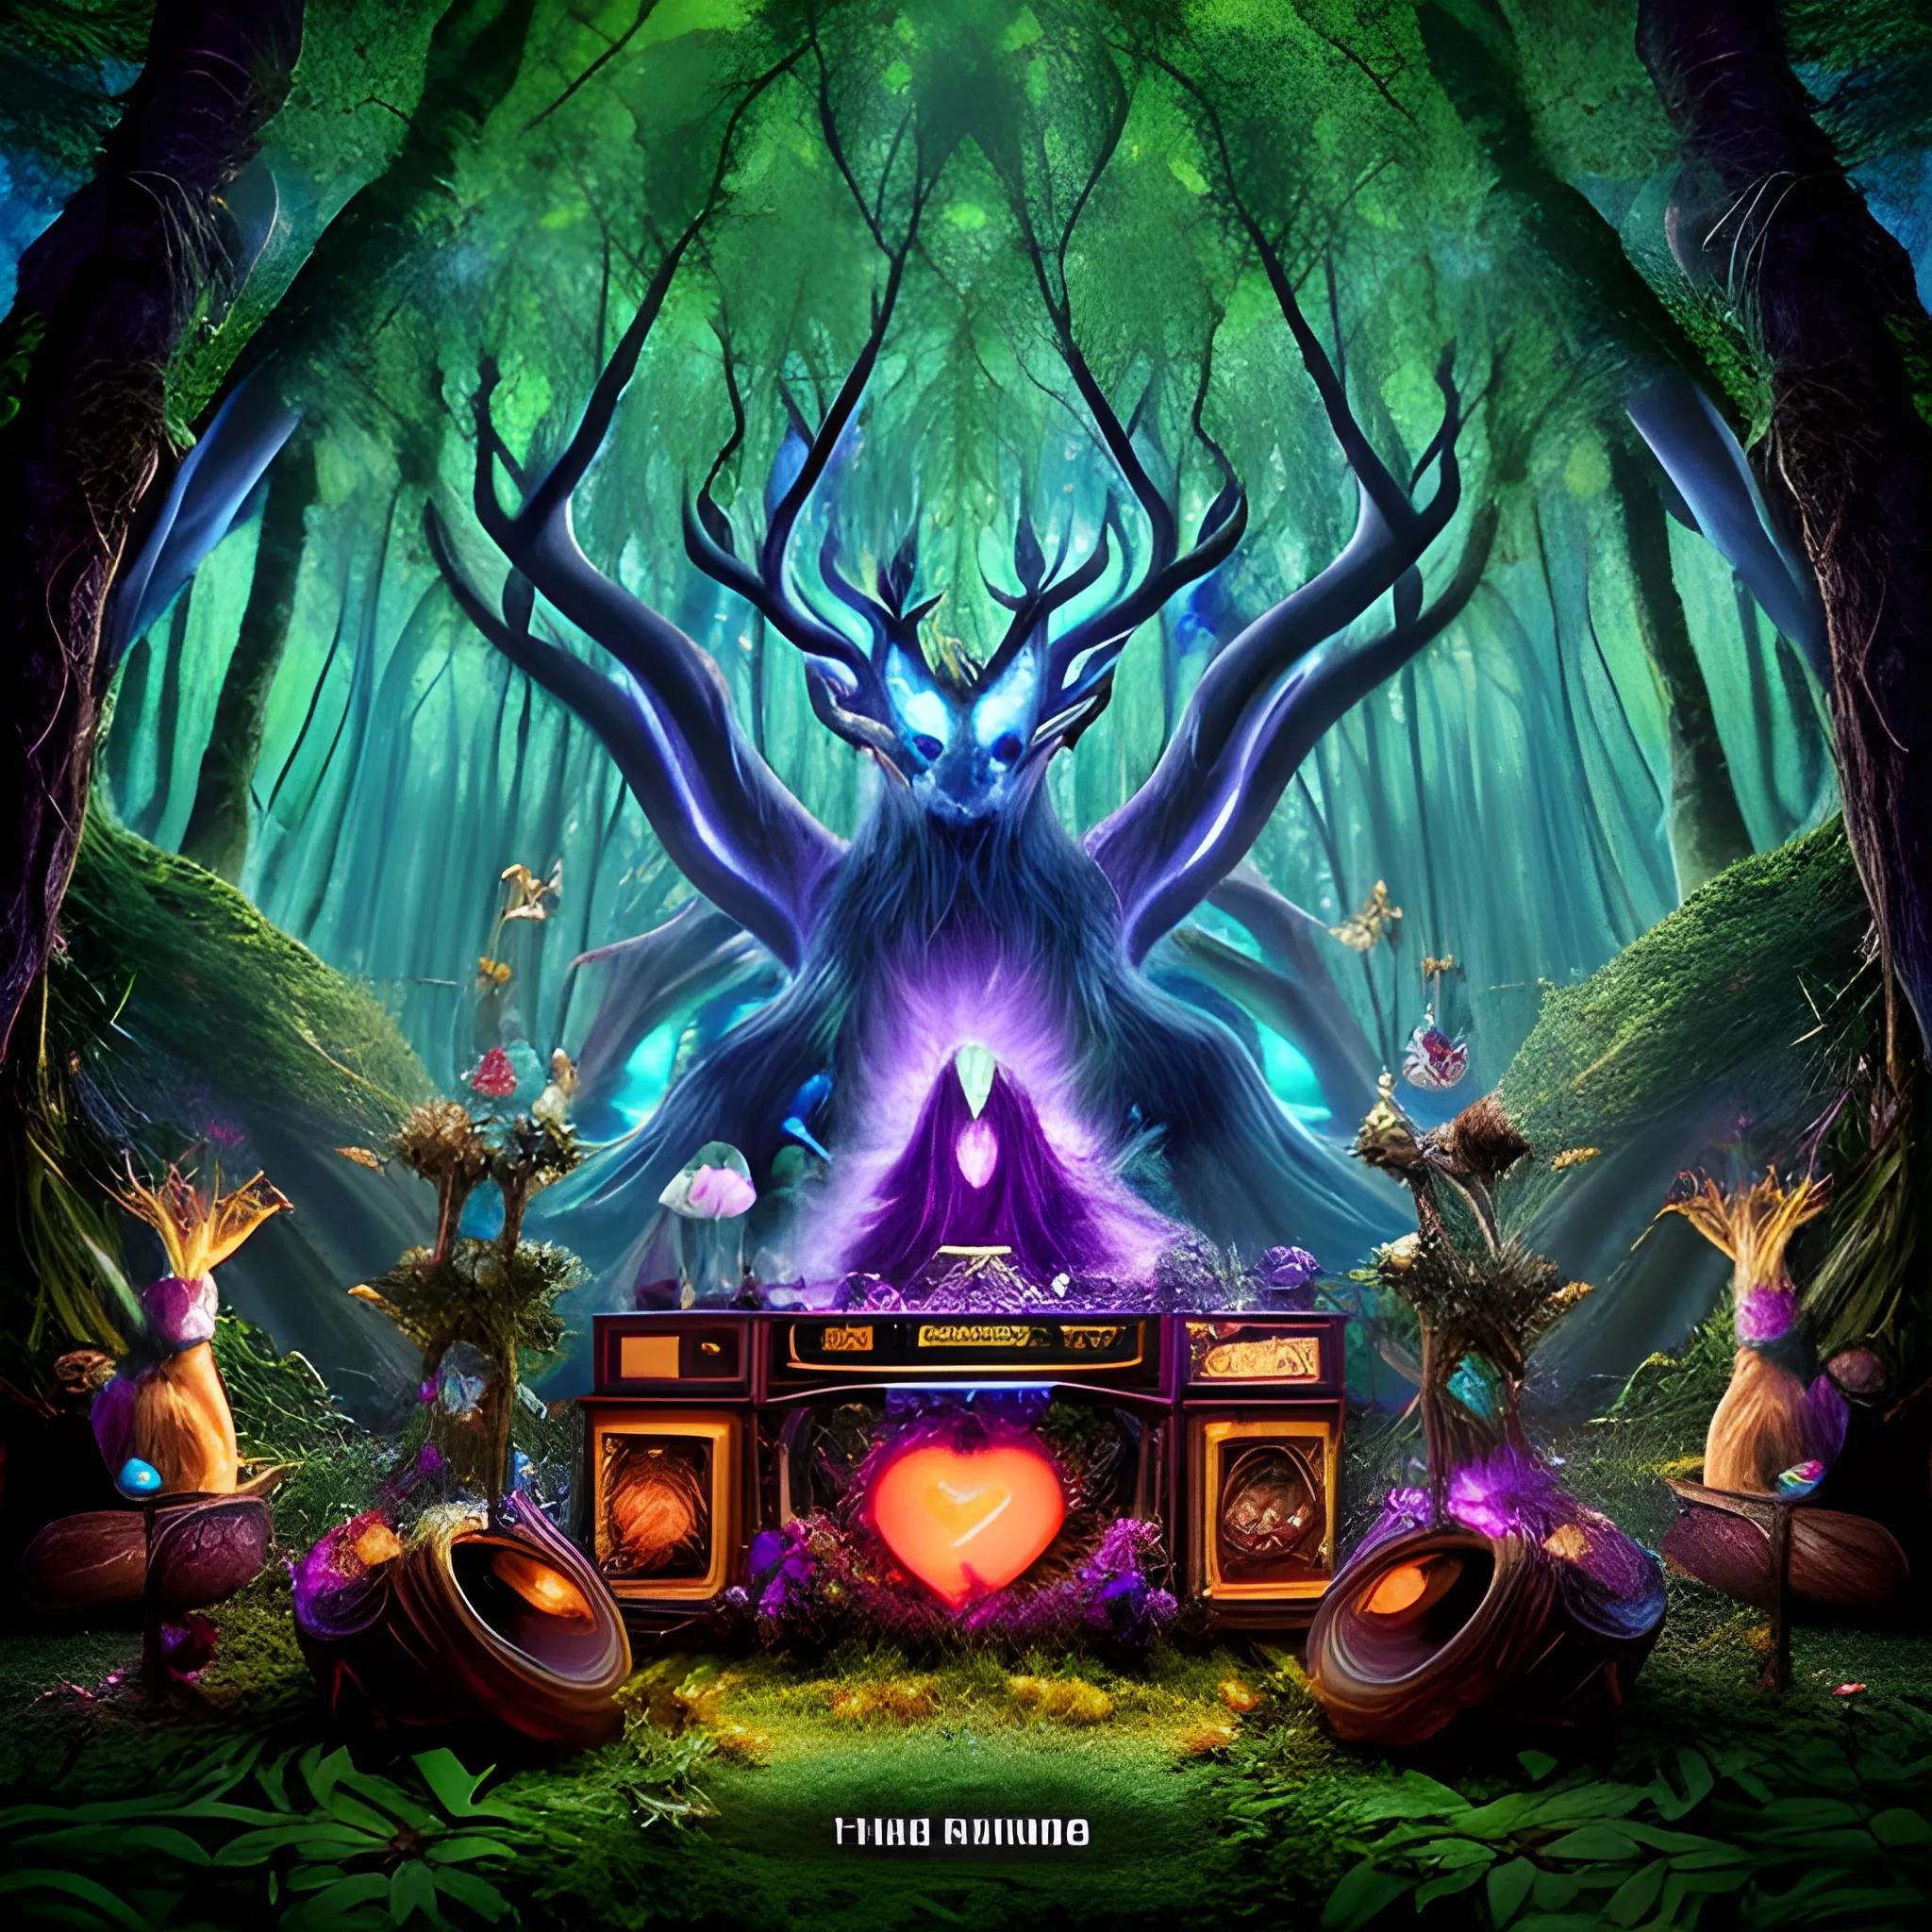 In the heart of the enchanted forest, the DJ conjures melodies that lure mythical creatures from hibernation. The drums' resounding pulse harmonizes with the whispers of trees, creating an otherworldly symphony. Lose yourself in nature's most mesmerizing dance.